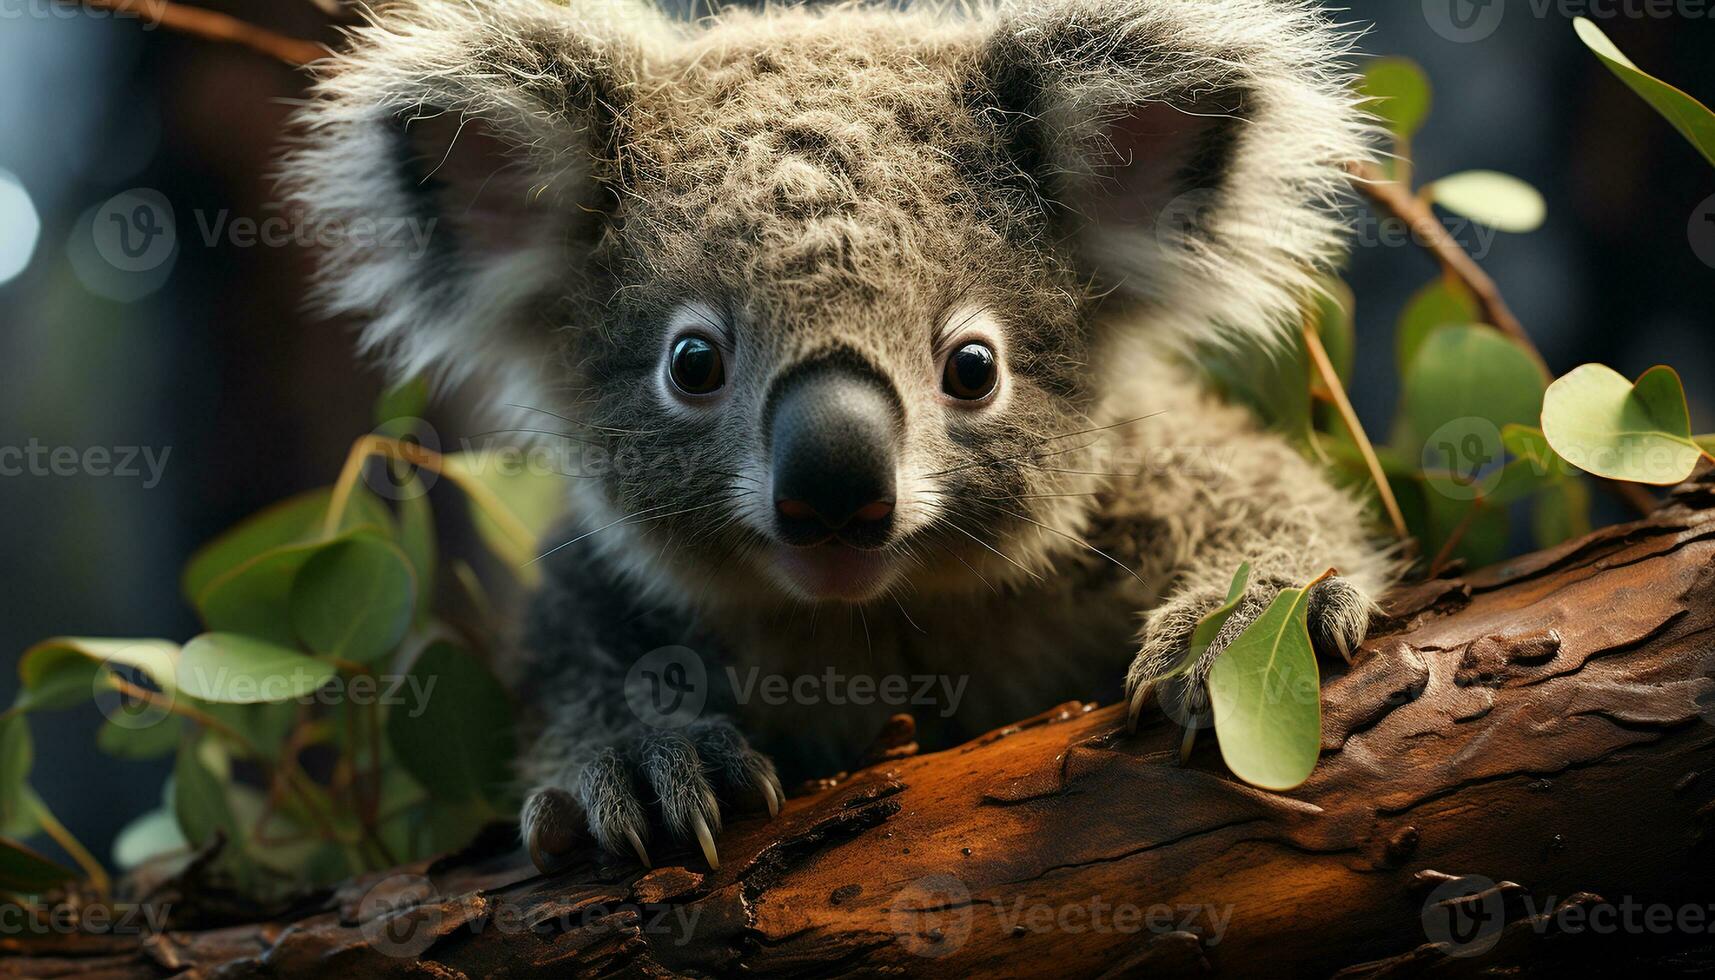 Cute koala sitting on branch, looking at camera generated by AI photo